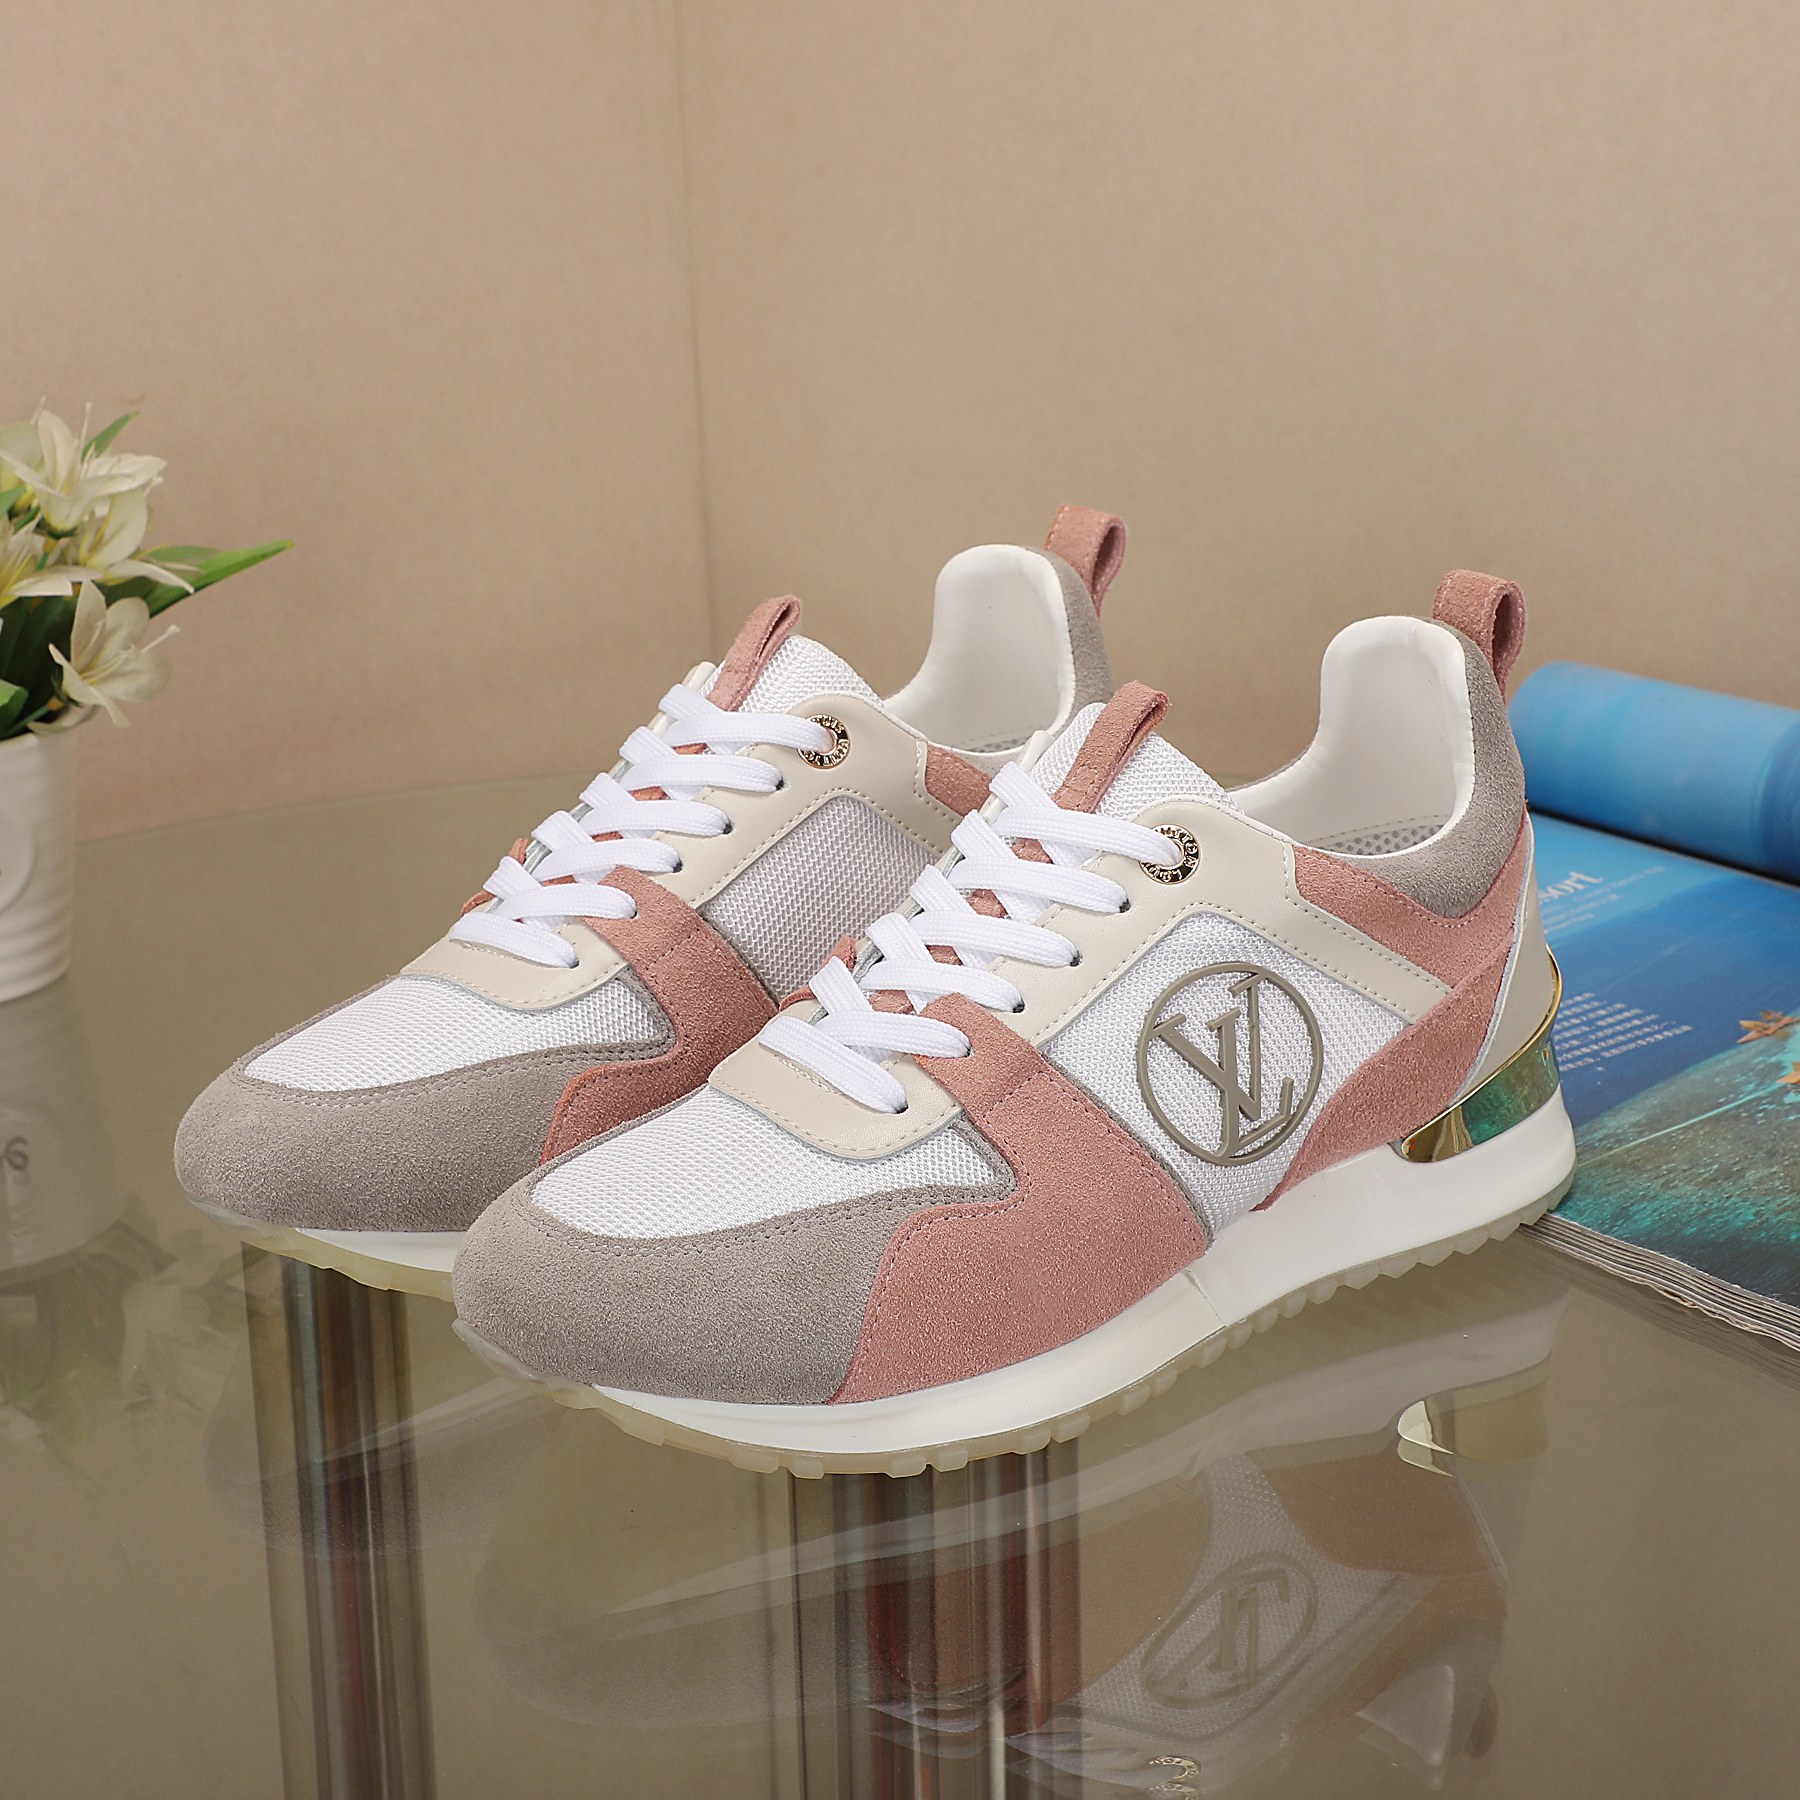 AL LV official website sync sneakers, this Run Away sneaker is inspired by running shoe design, high